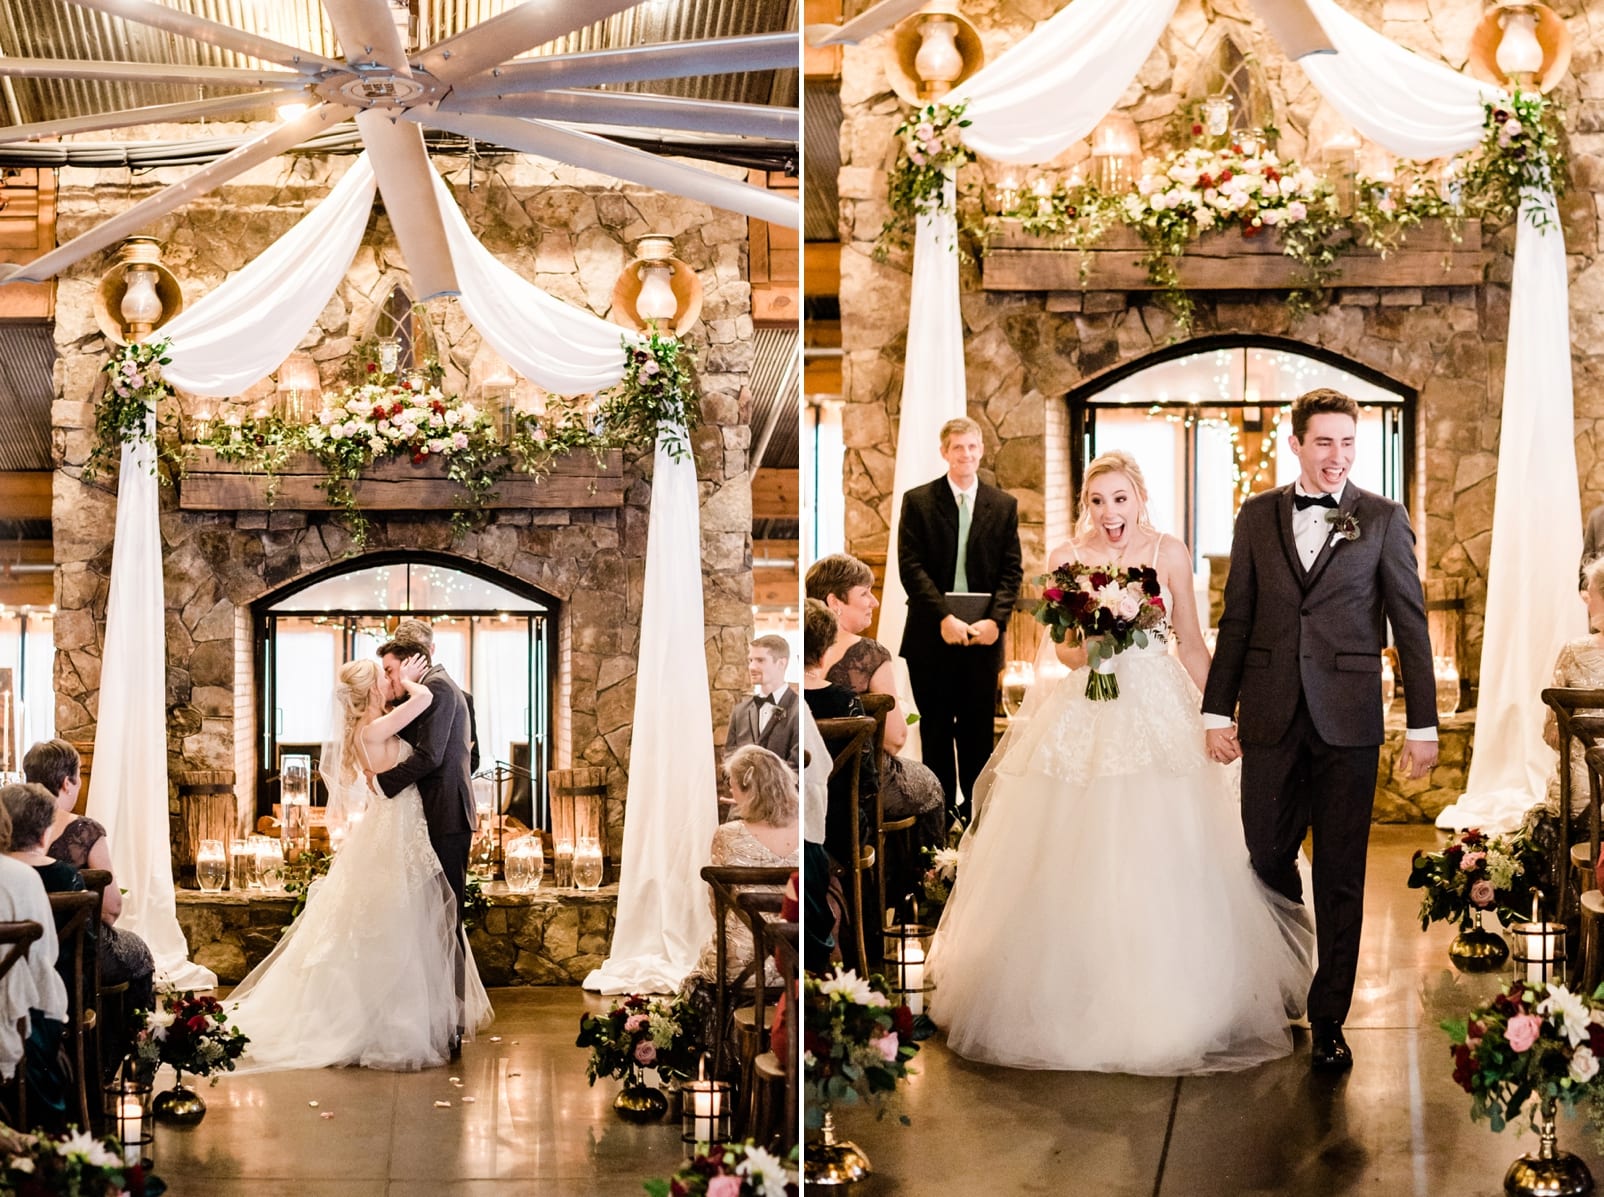 Raleigh bride and groom first kiss after wedding ceremony in front of a large stone fireplace photo